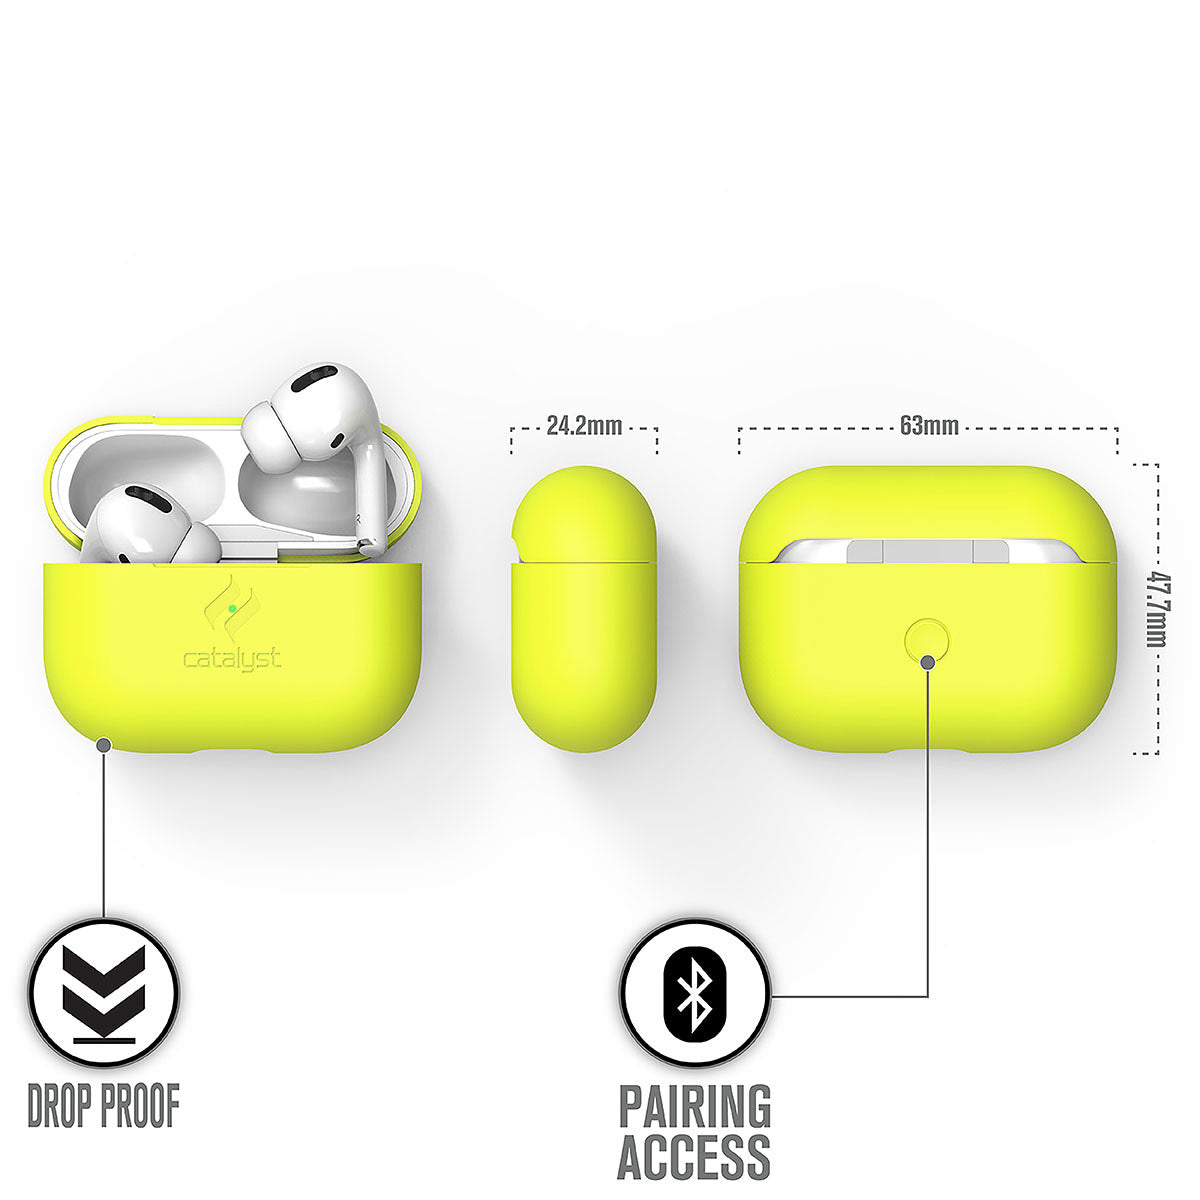 Catalyst airpods pro gen 2/1 slim case showing the case dimensions in a neon yellow colorway text reads drop proof pairing access